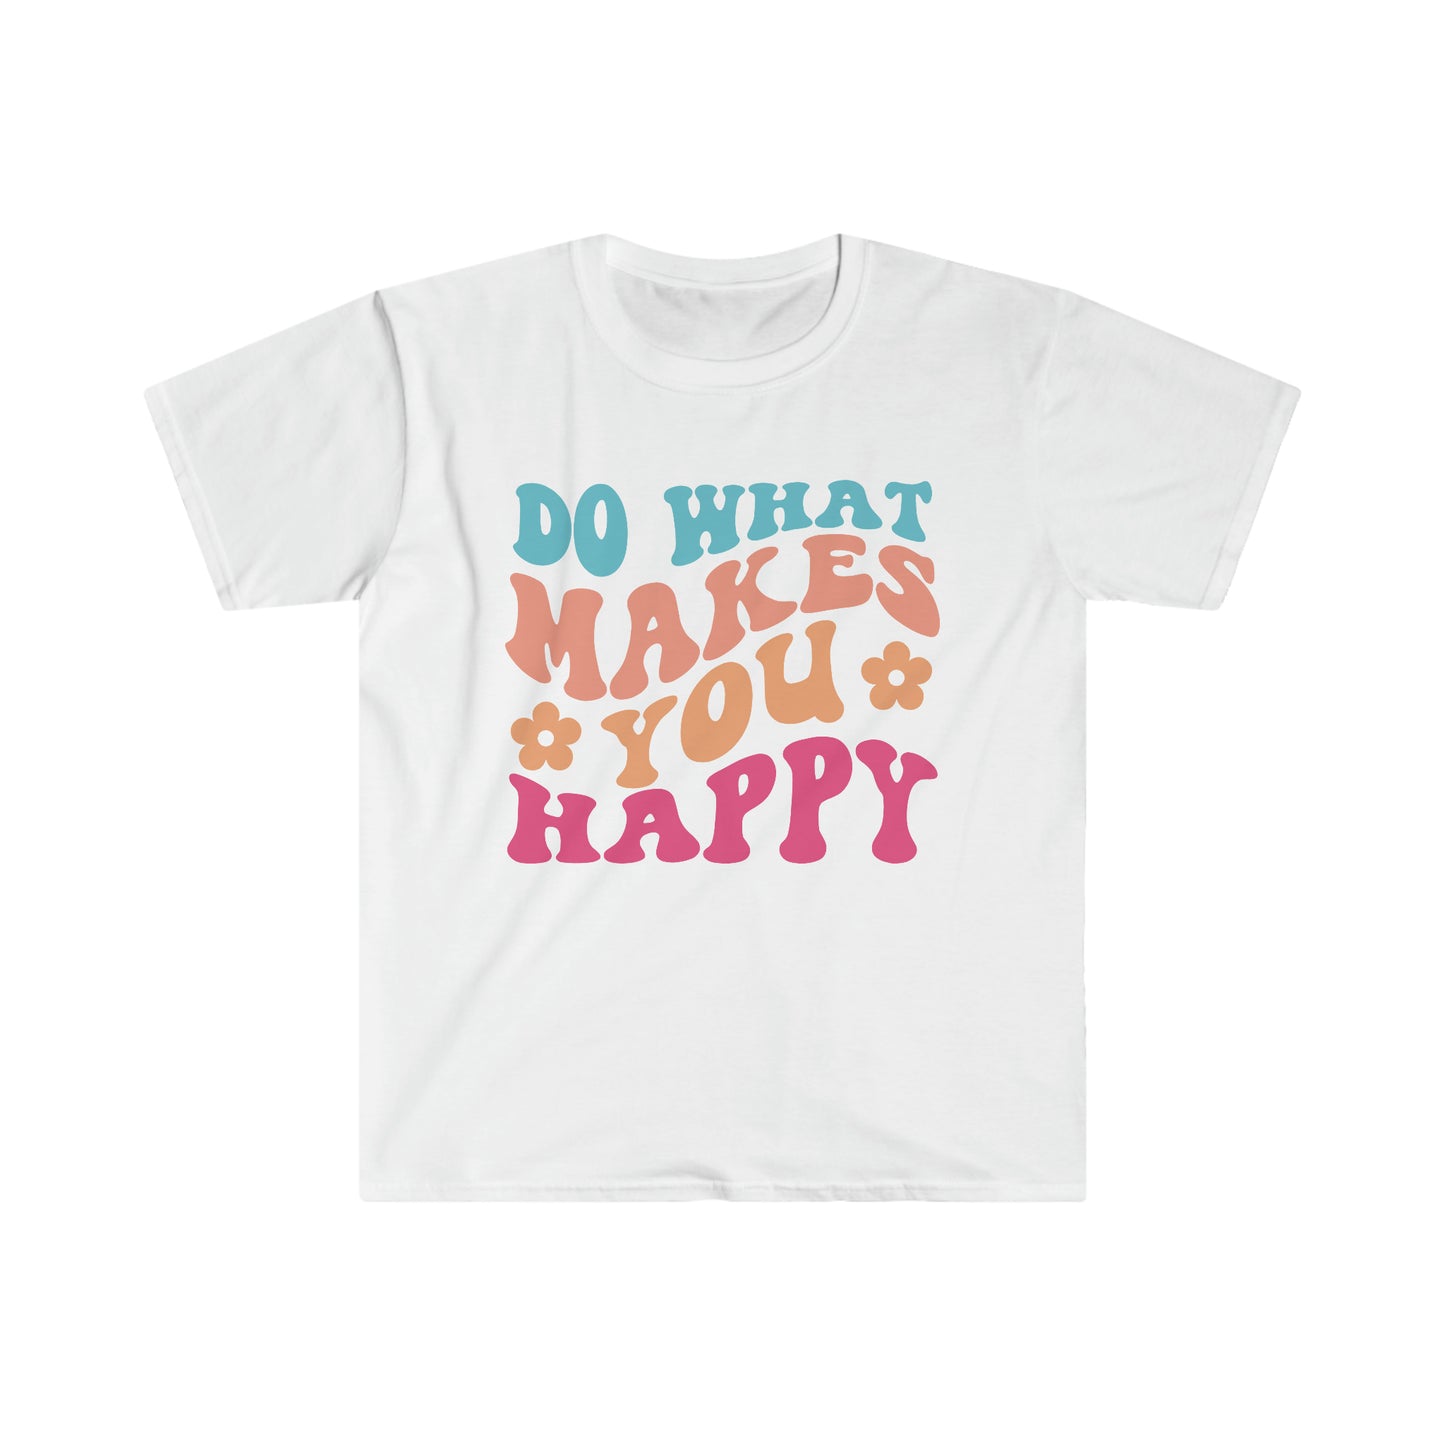 Do what makes you happy - Unisex Softstyle T-Shirt